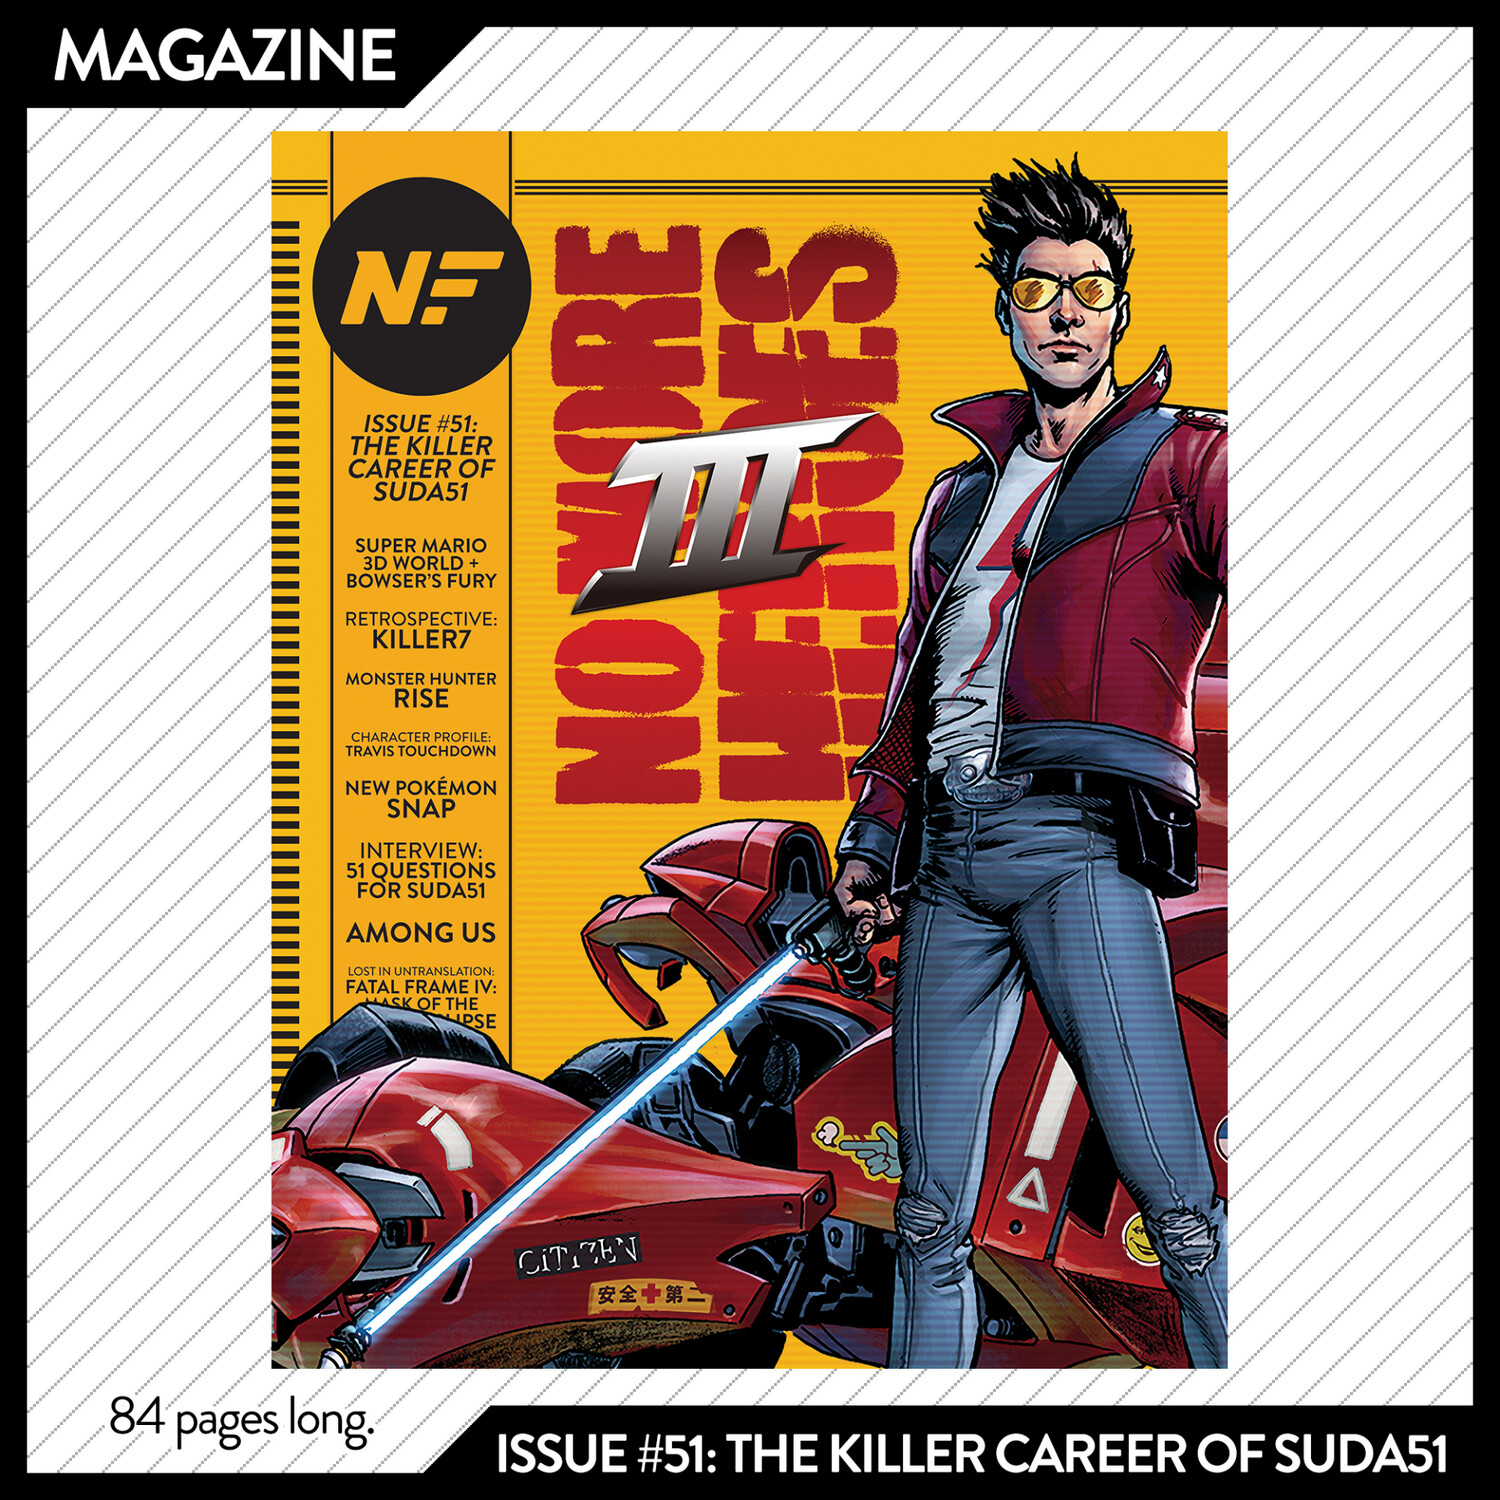 Issue #51: The Killer Career of Suda51 – March/April 2021